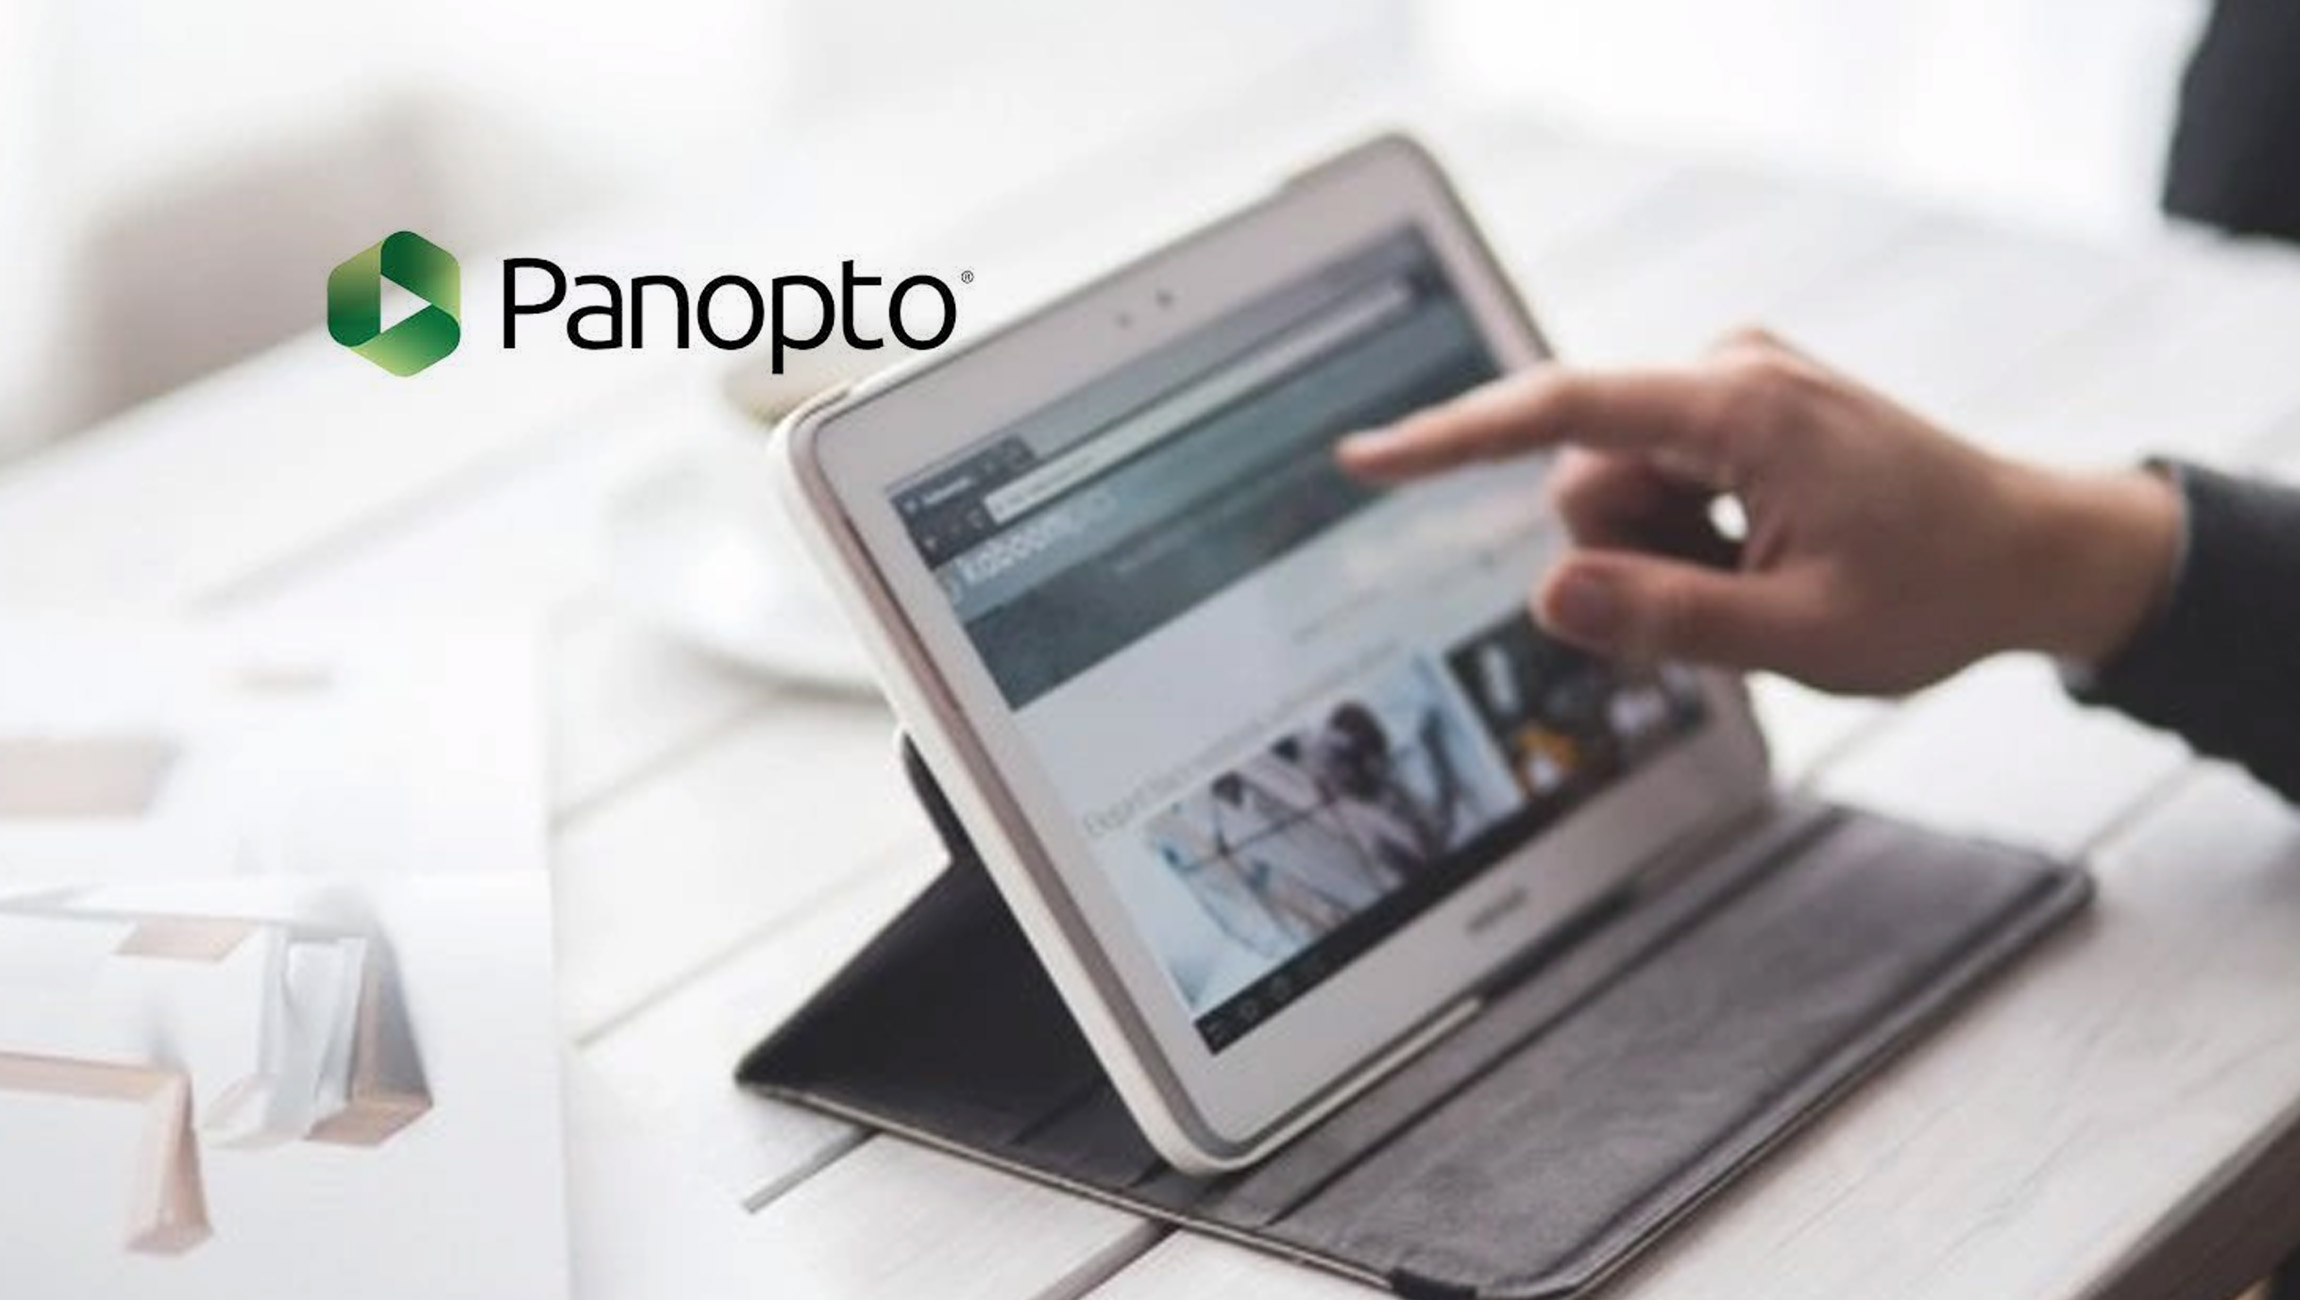 Search-Meeting-Transcripts-in-Your-Inbox-Using-Panopto